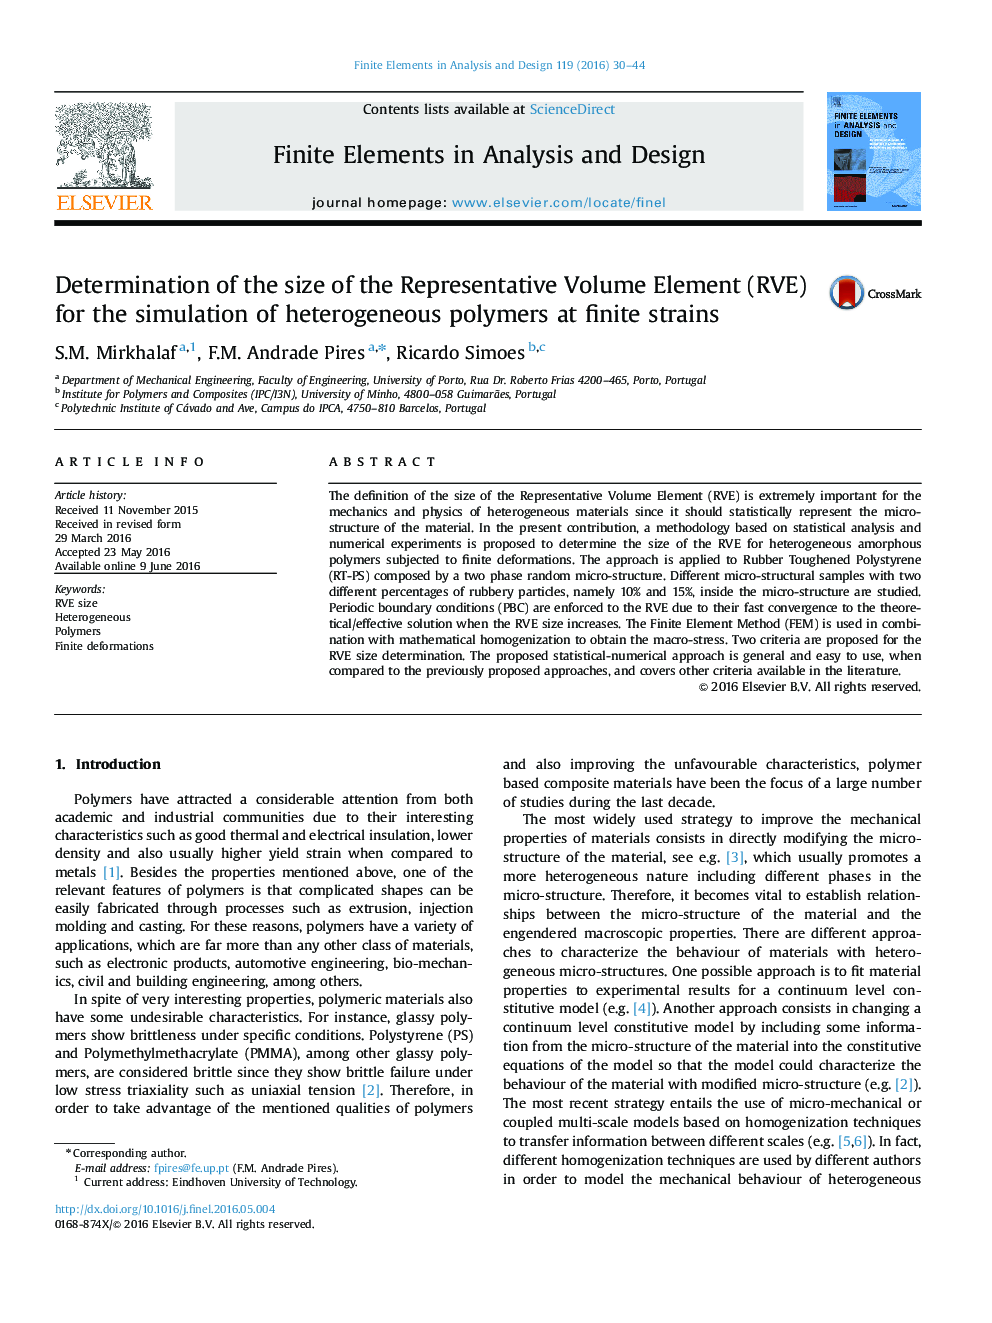 Determination of the size of the Representative Volume Element (RVE) for the simulation of heterogeneous polymers at finite strains